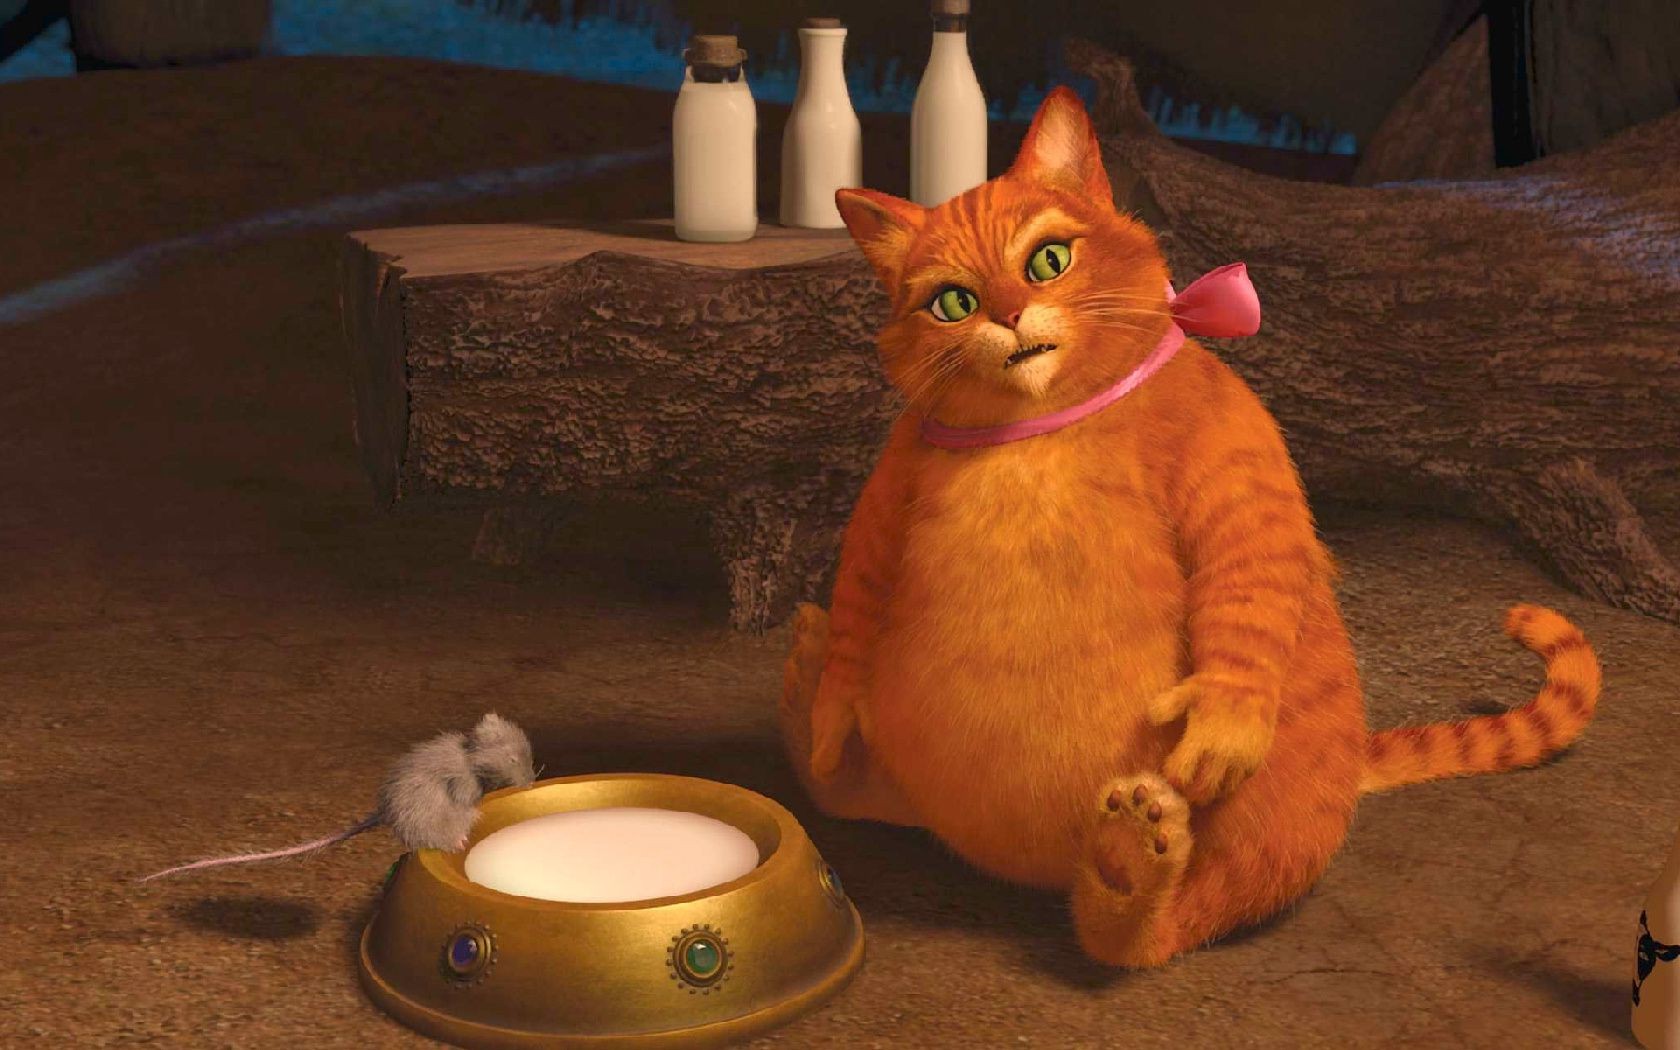 Shrek forever fat cat of lapel bow red Phone wallpapers